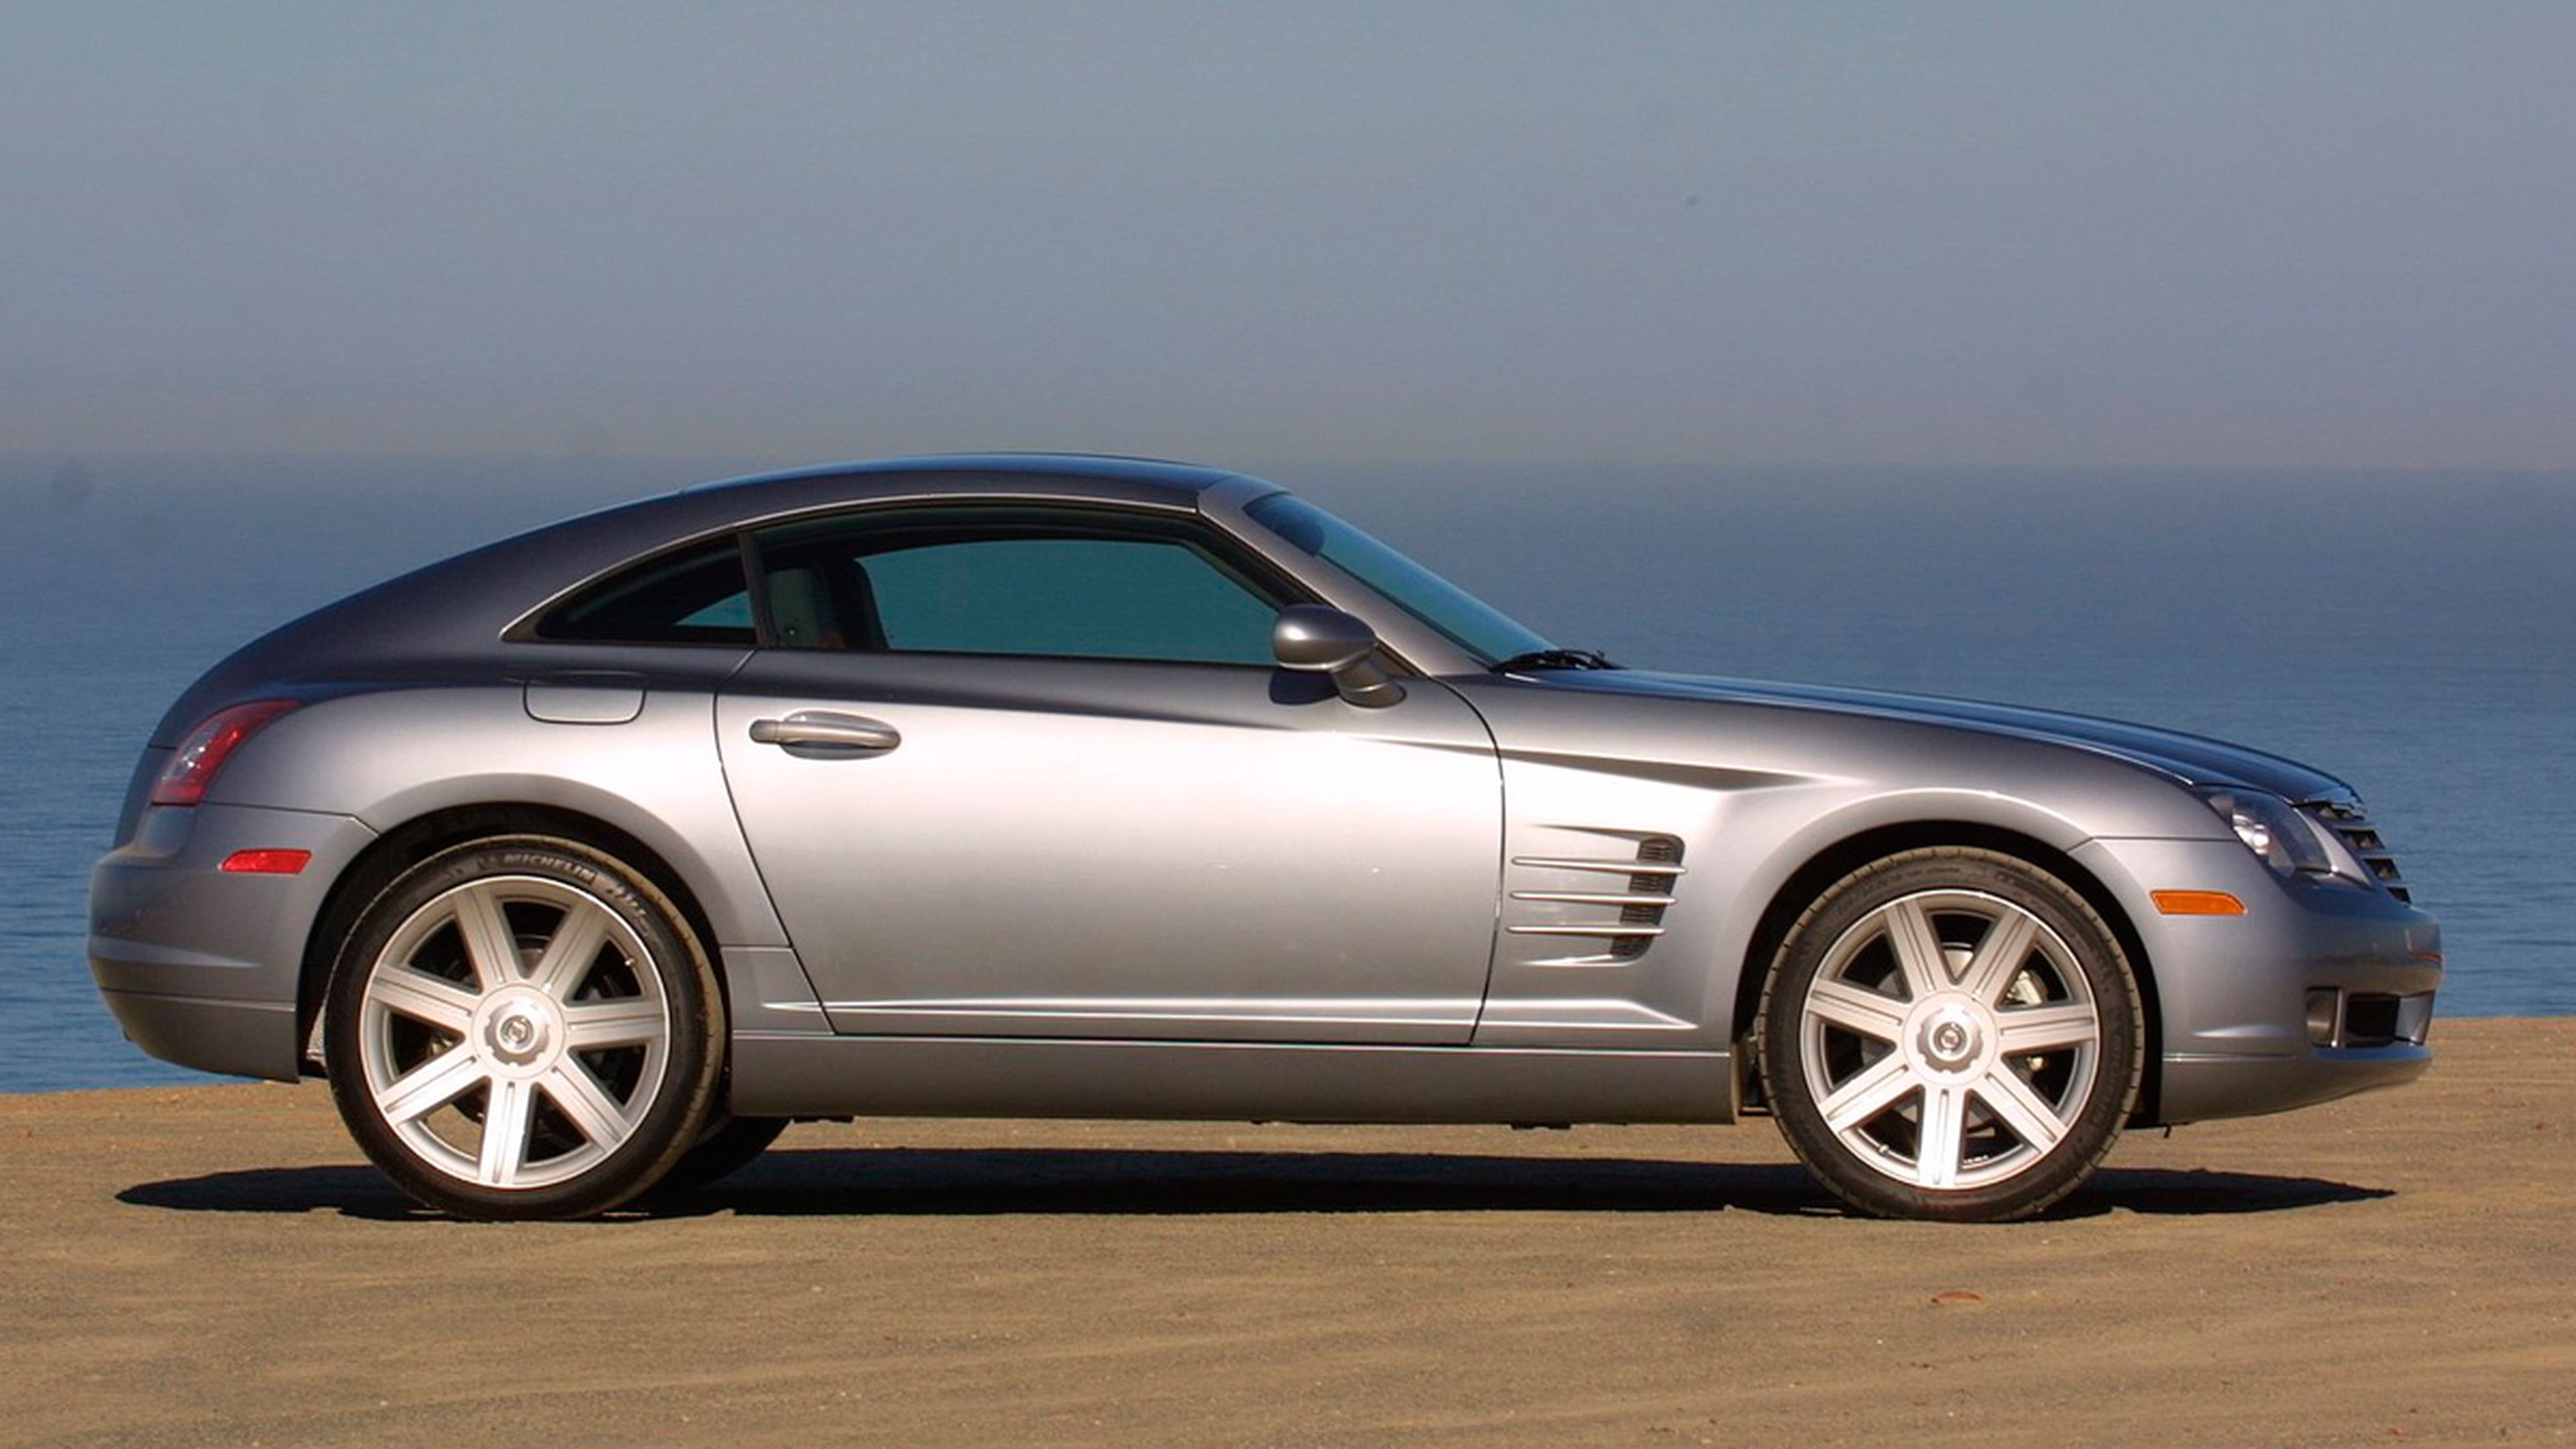 Chrysler Crossfire lateral